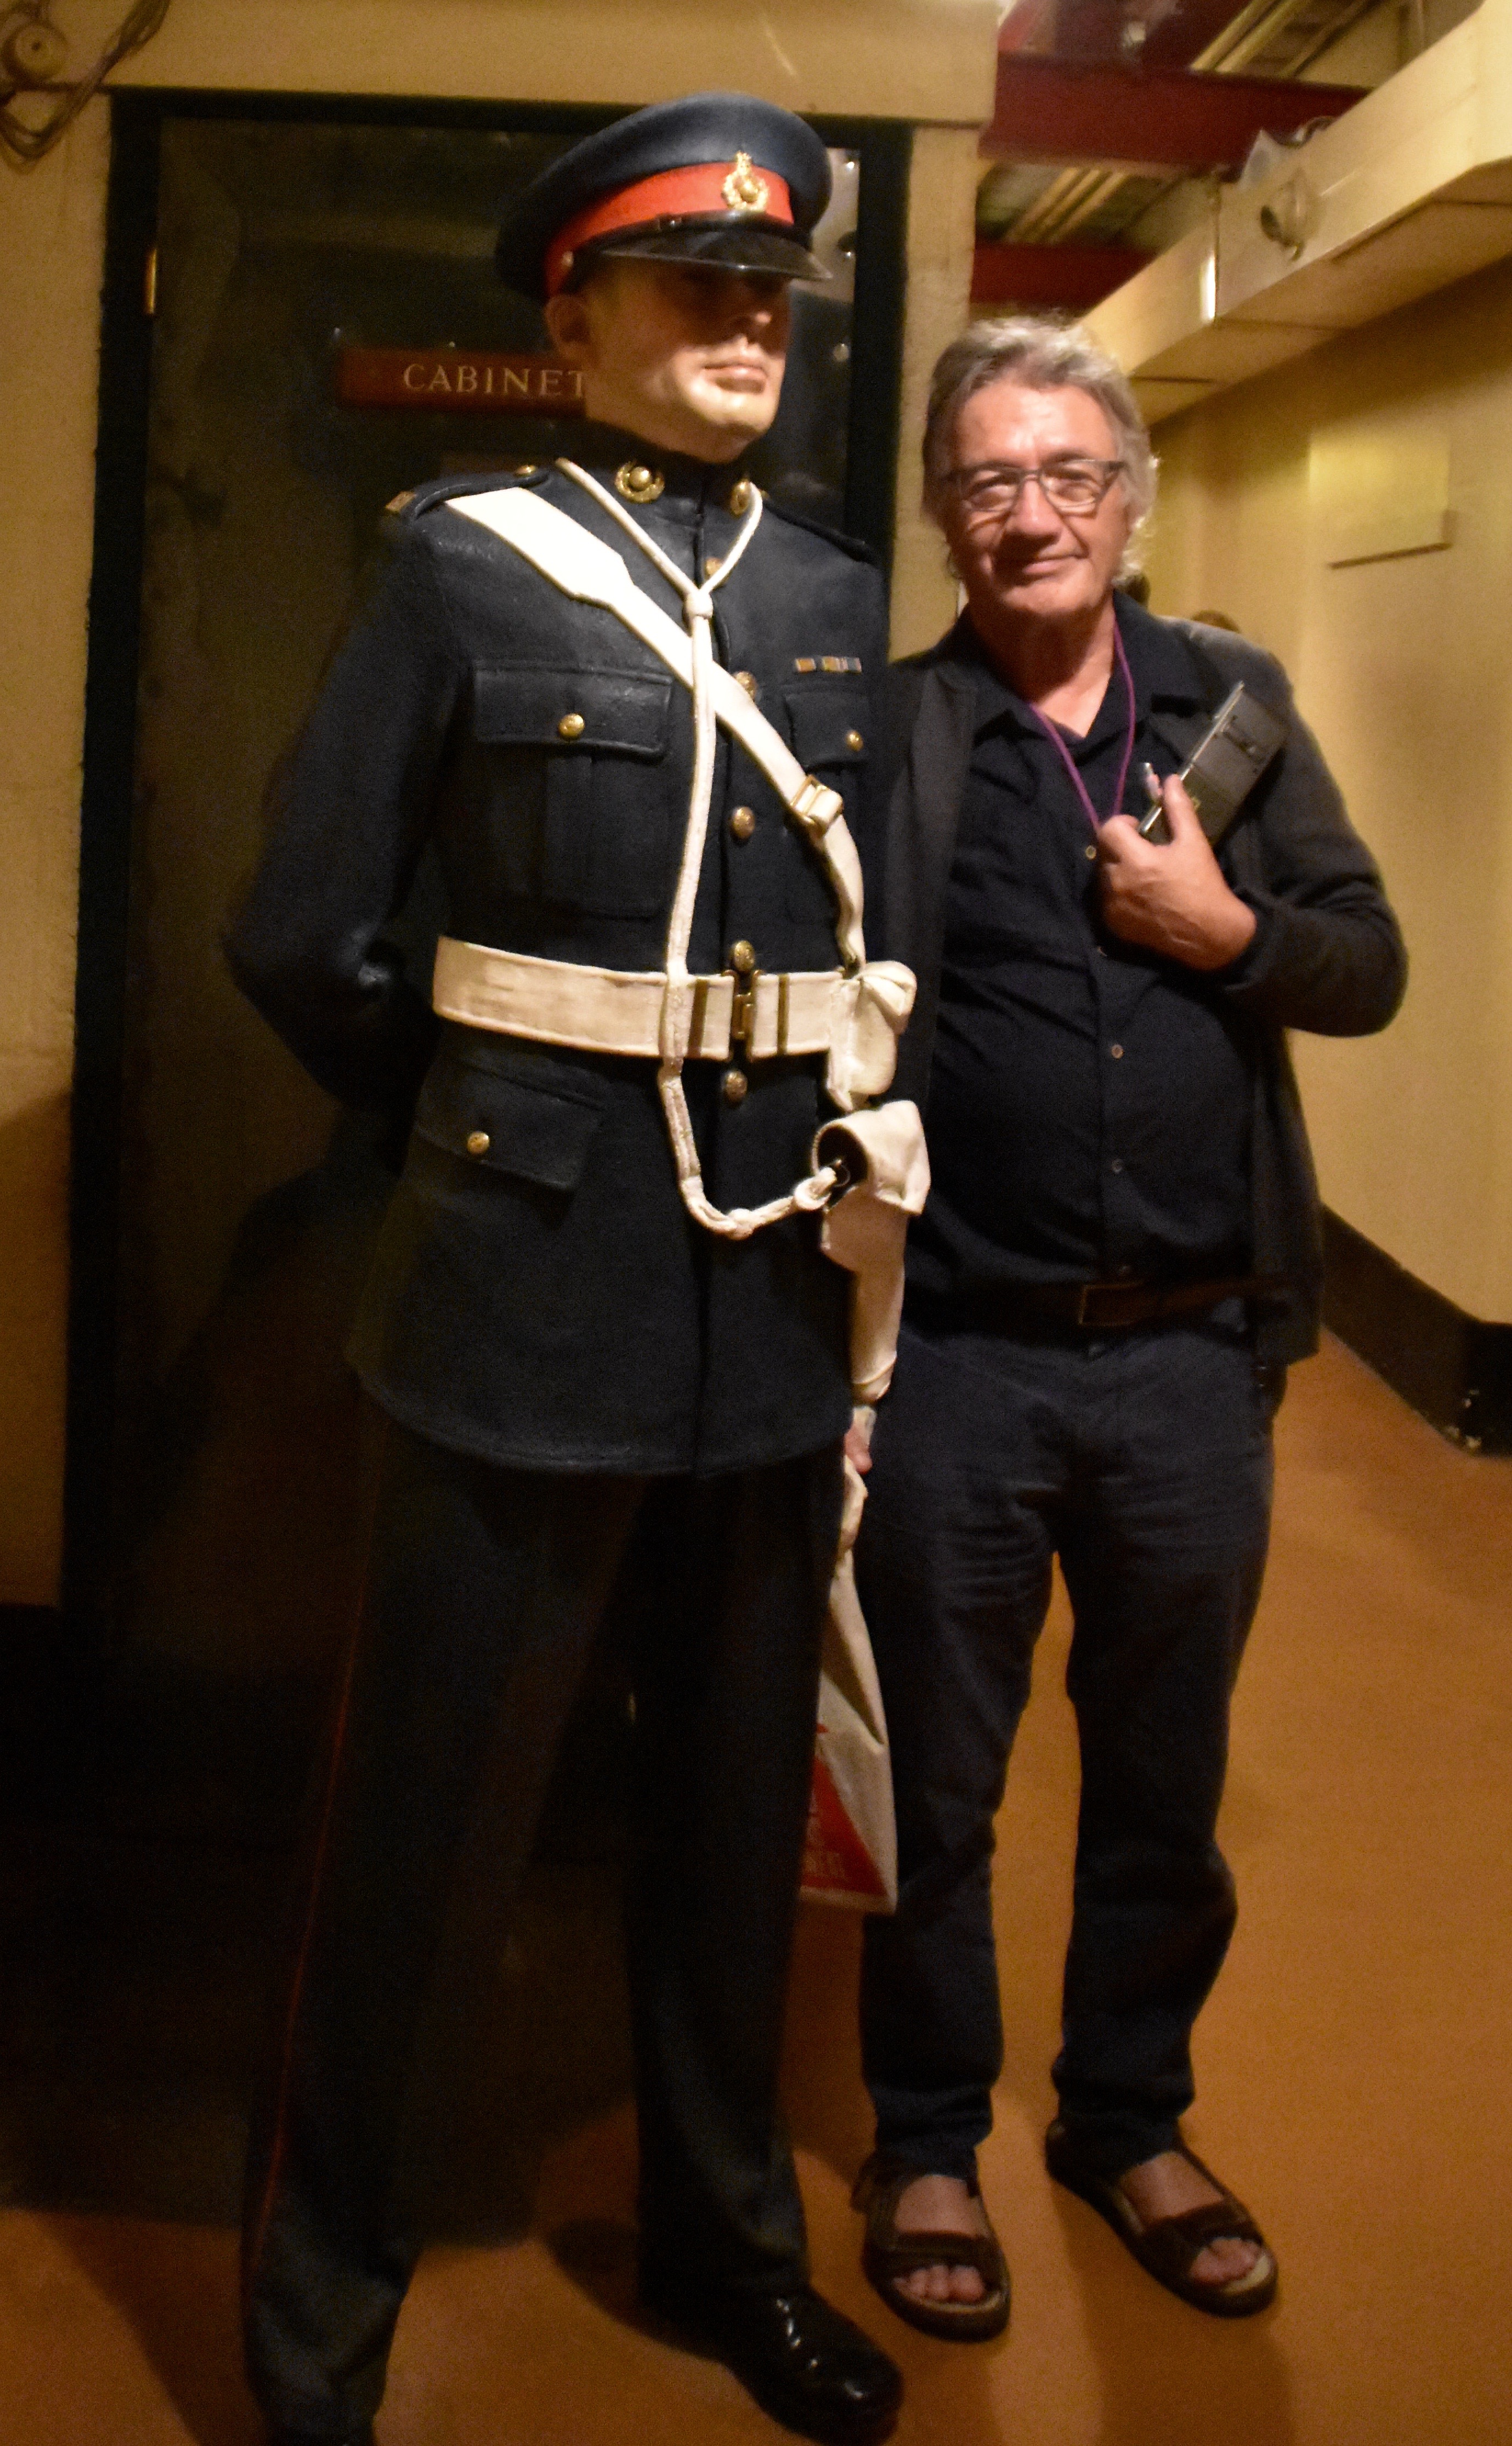 With a Royal Marine in the Churchill War Rooms